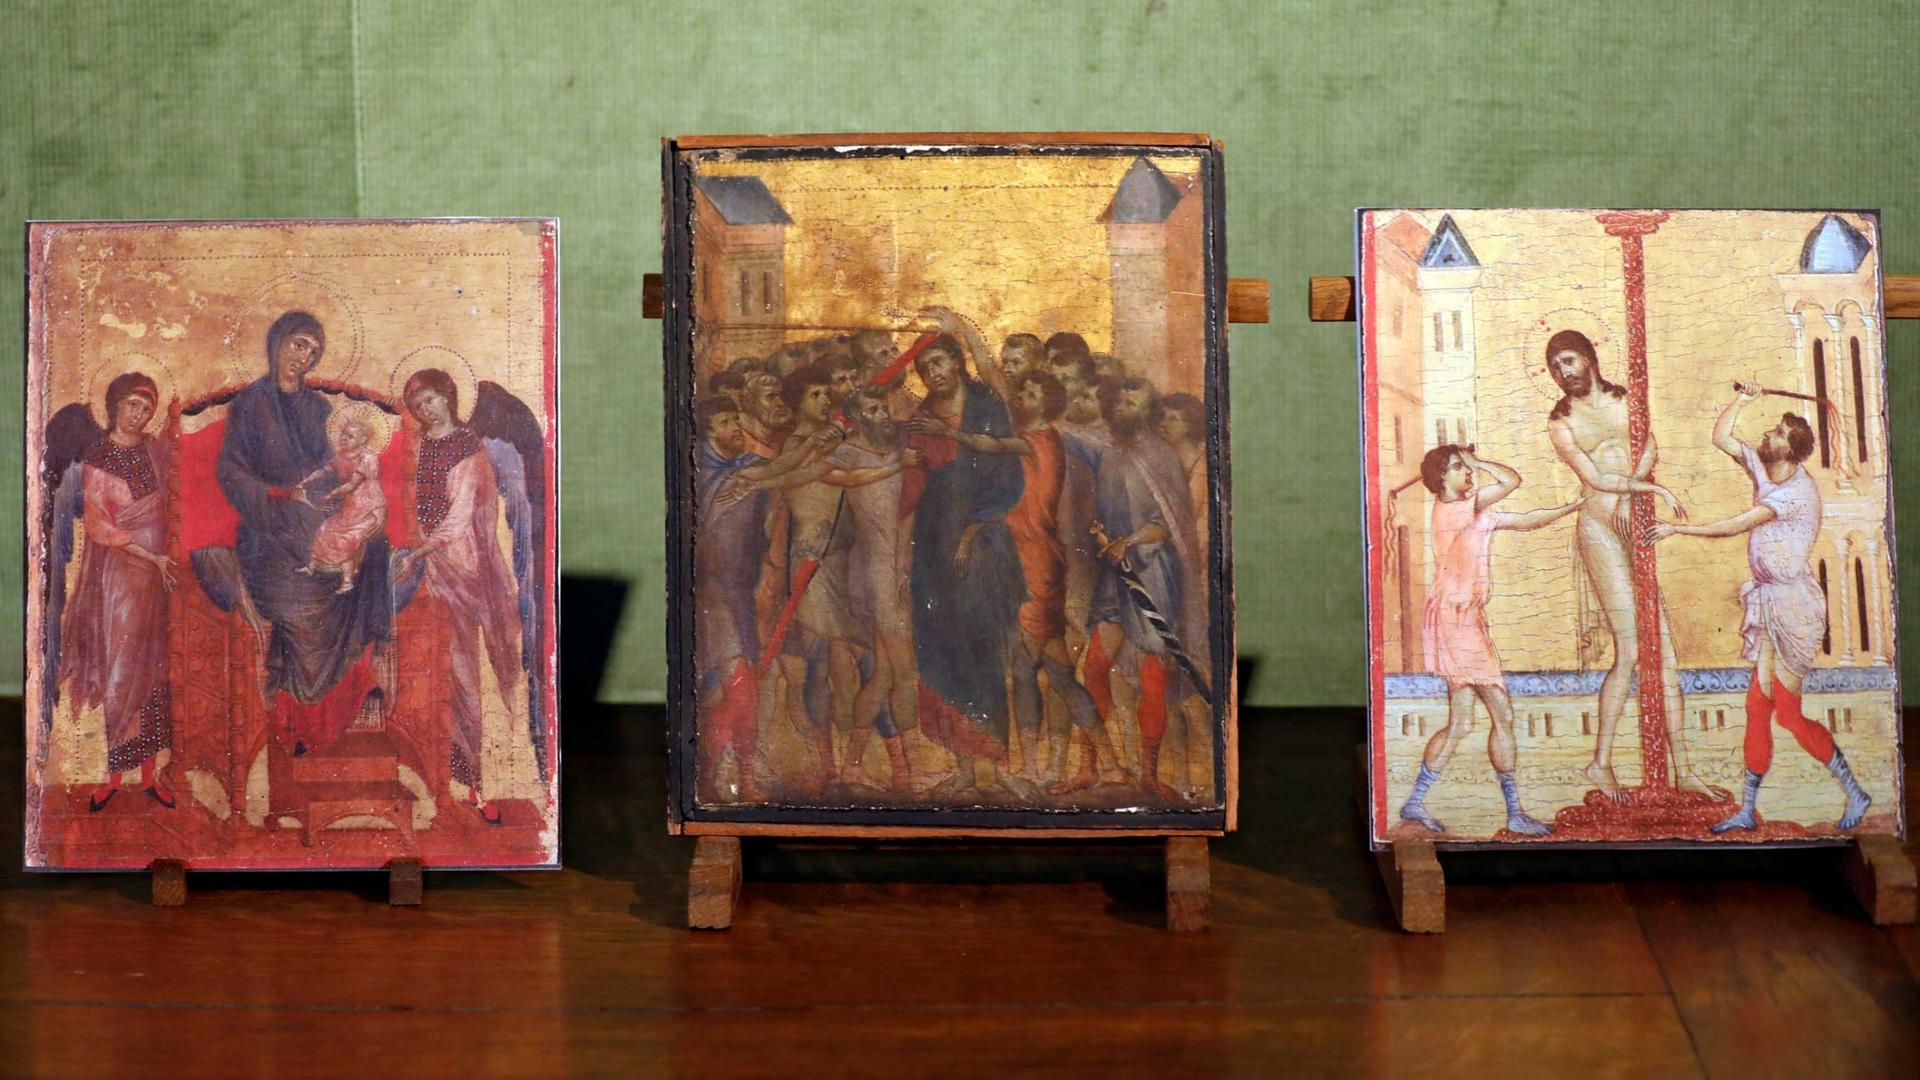 Three religious images are displayed side by side